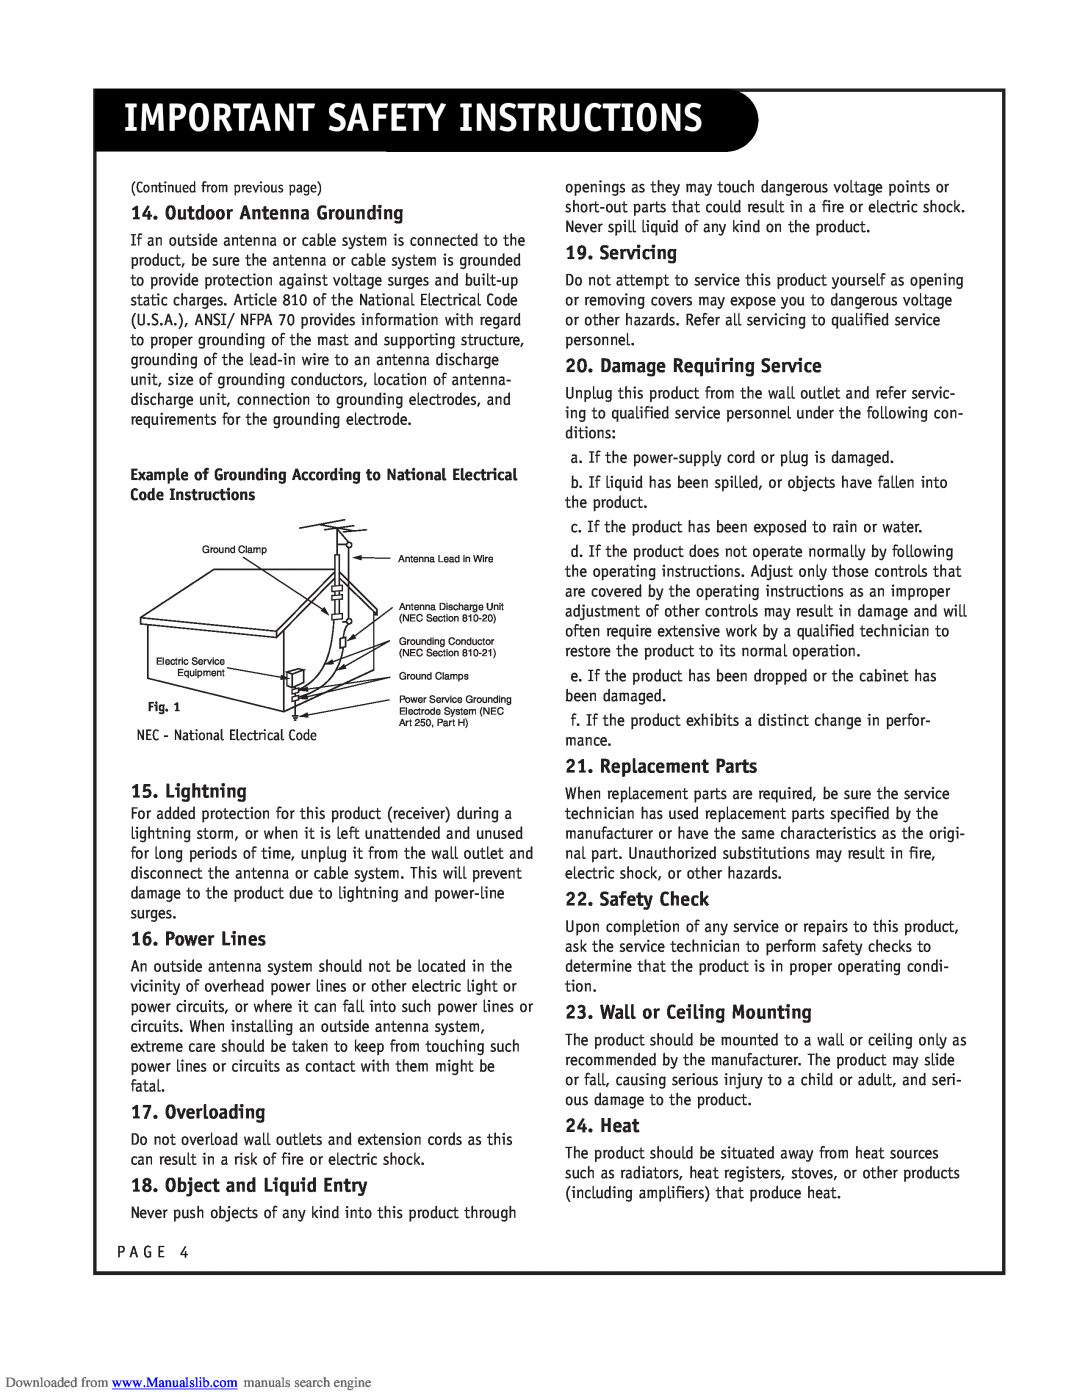 LG Electronics RU-52SZ53D owner manual Important Safety Instructions, Outdoor Antenna Grounding 